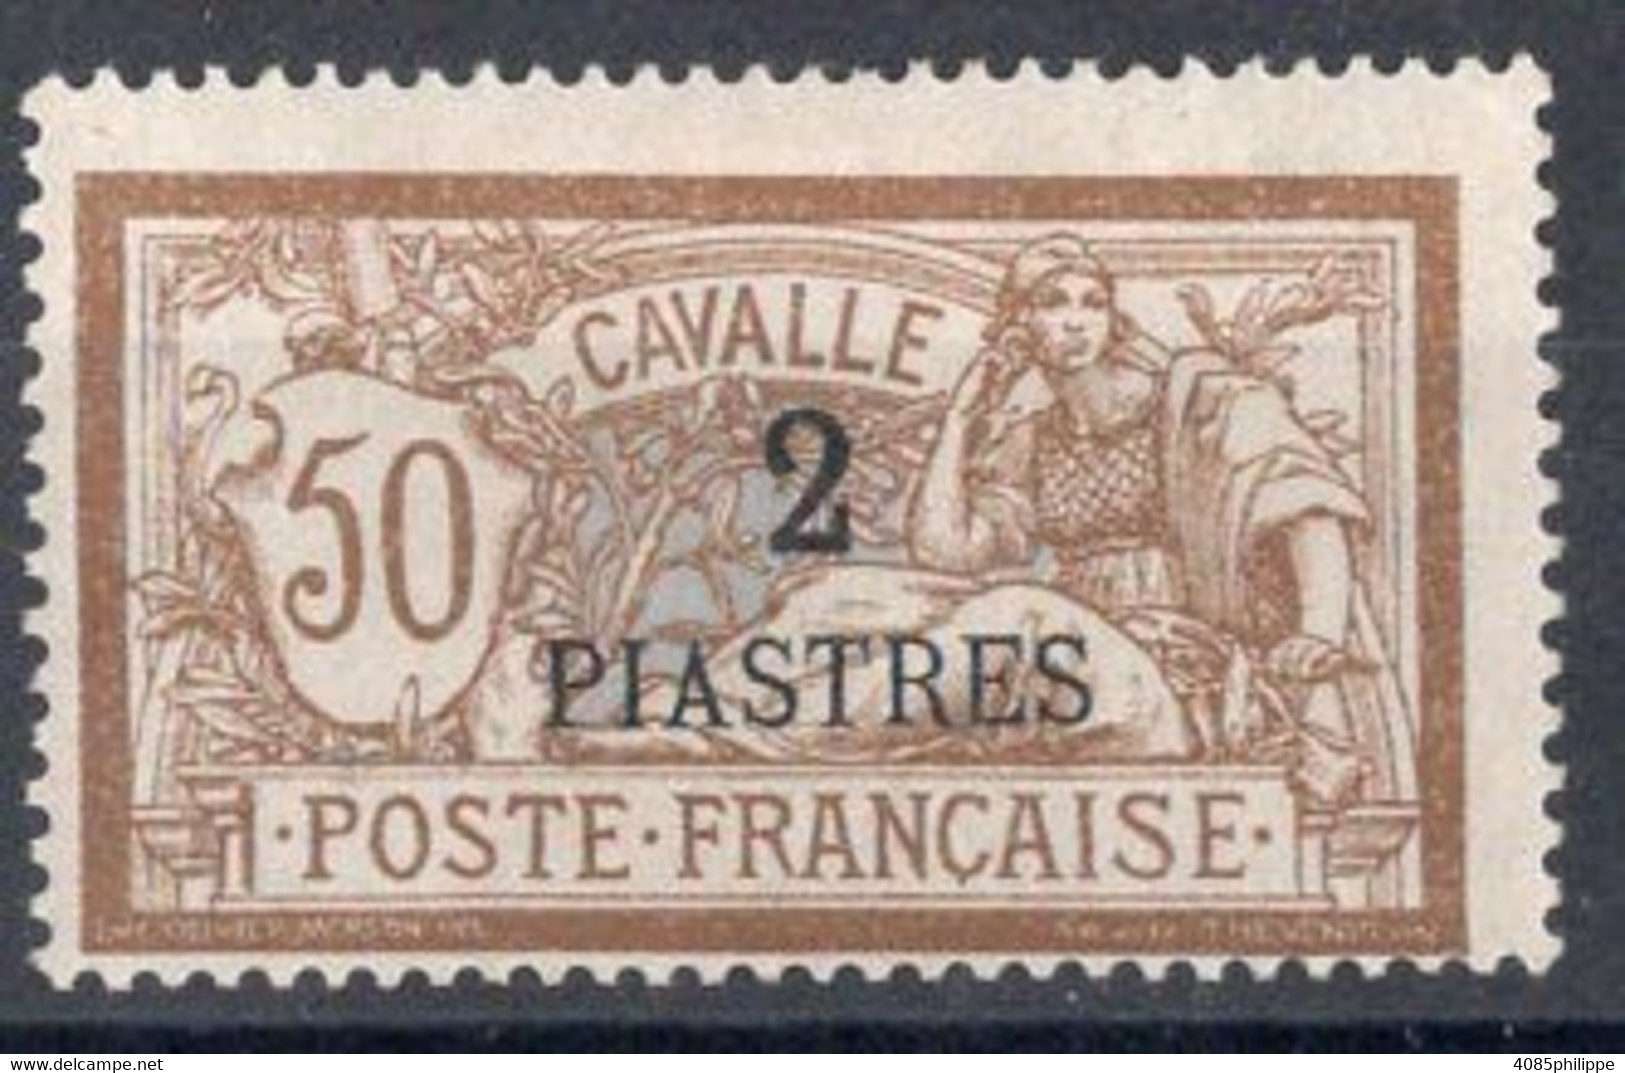 Cavalle Timbre-poste N°14*  Neuf Charnière Cote : 16€00 - Ungebraucht